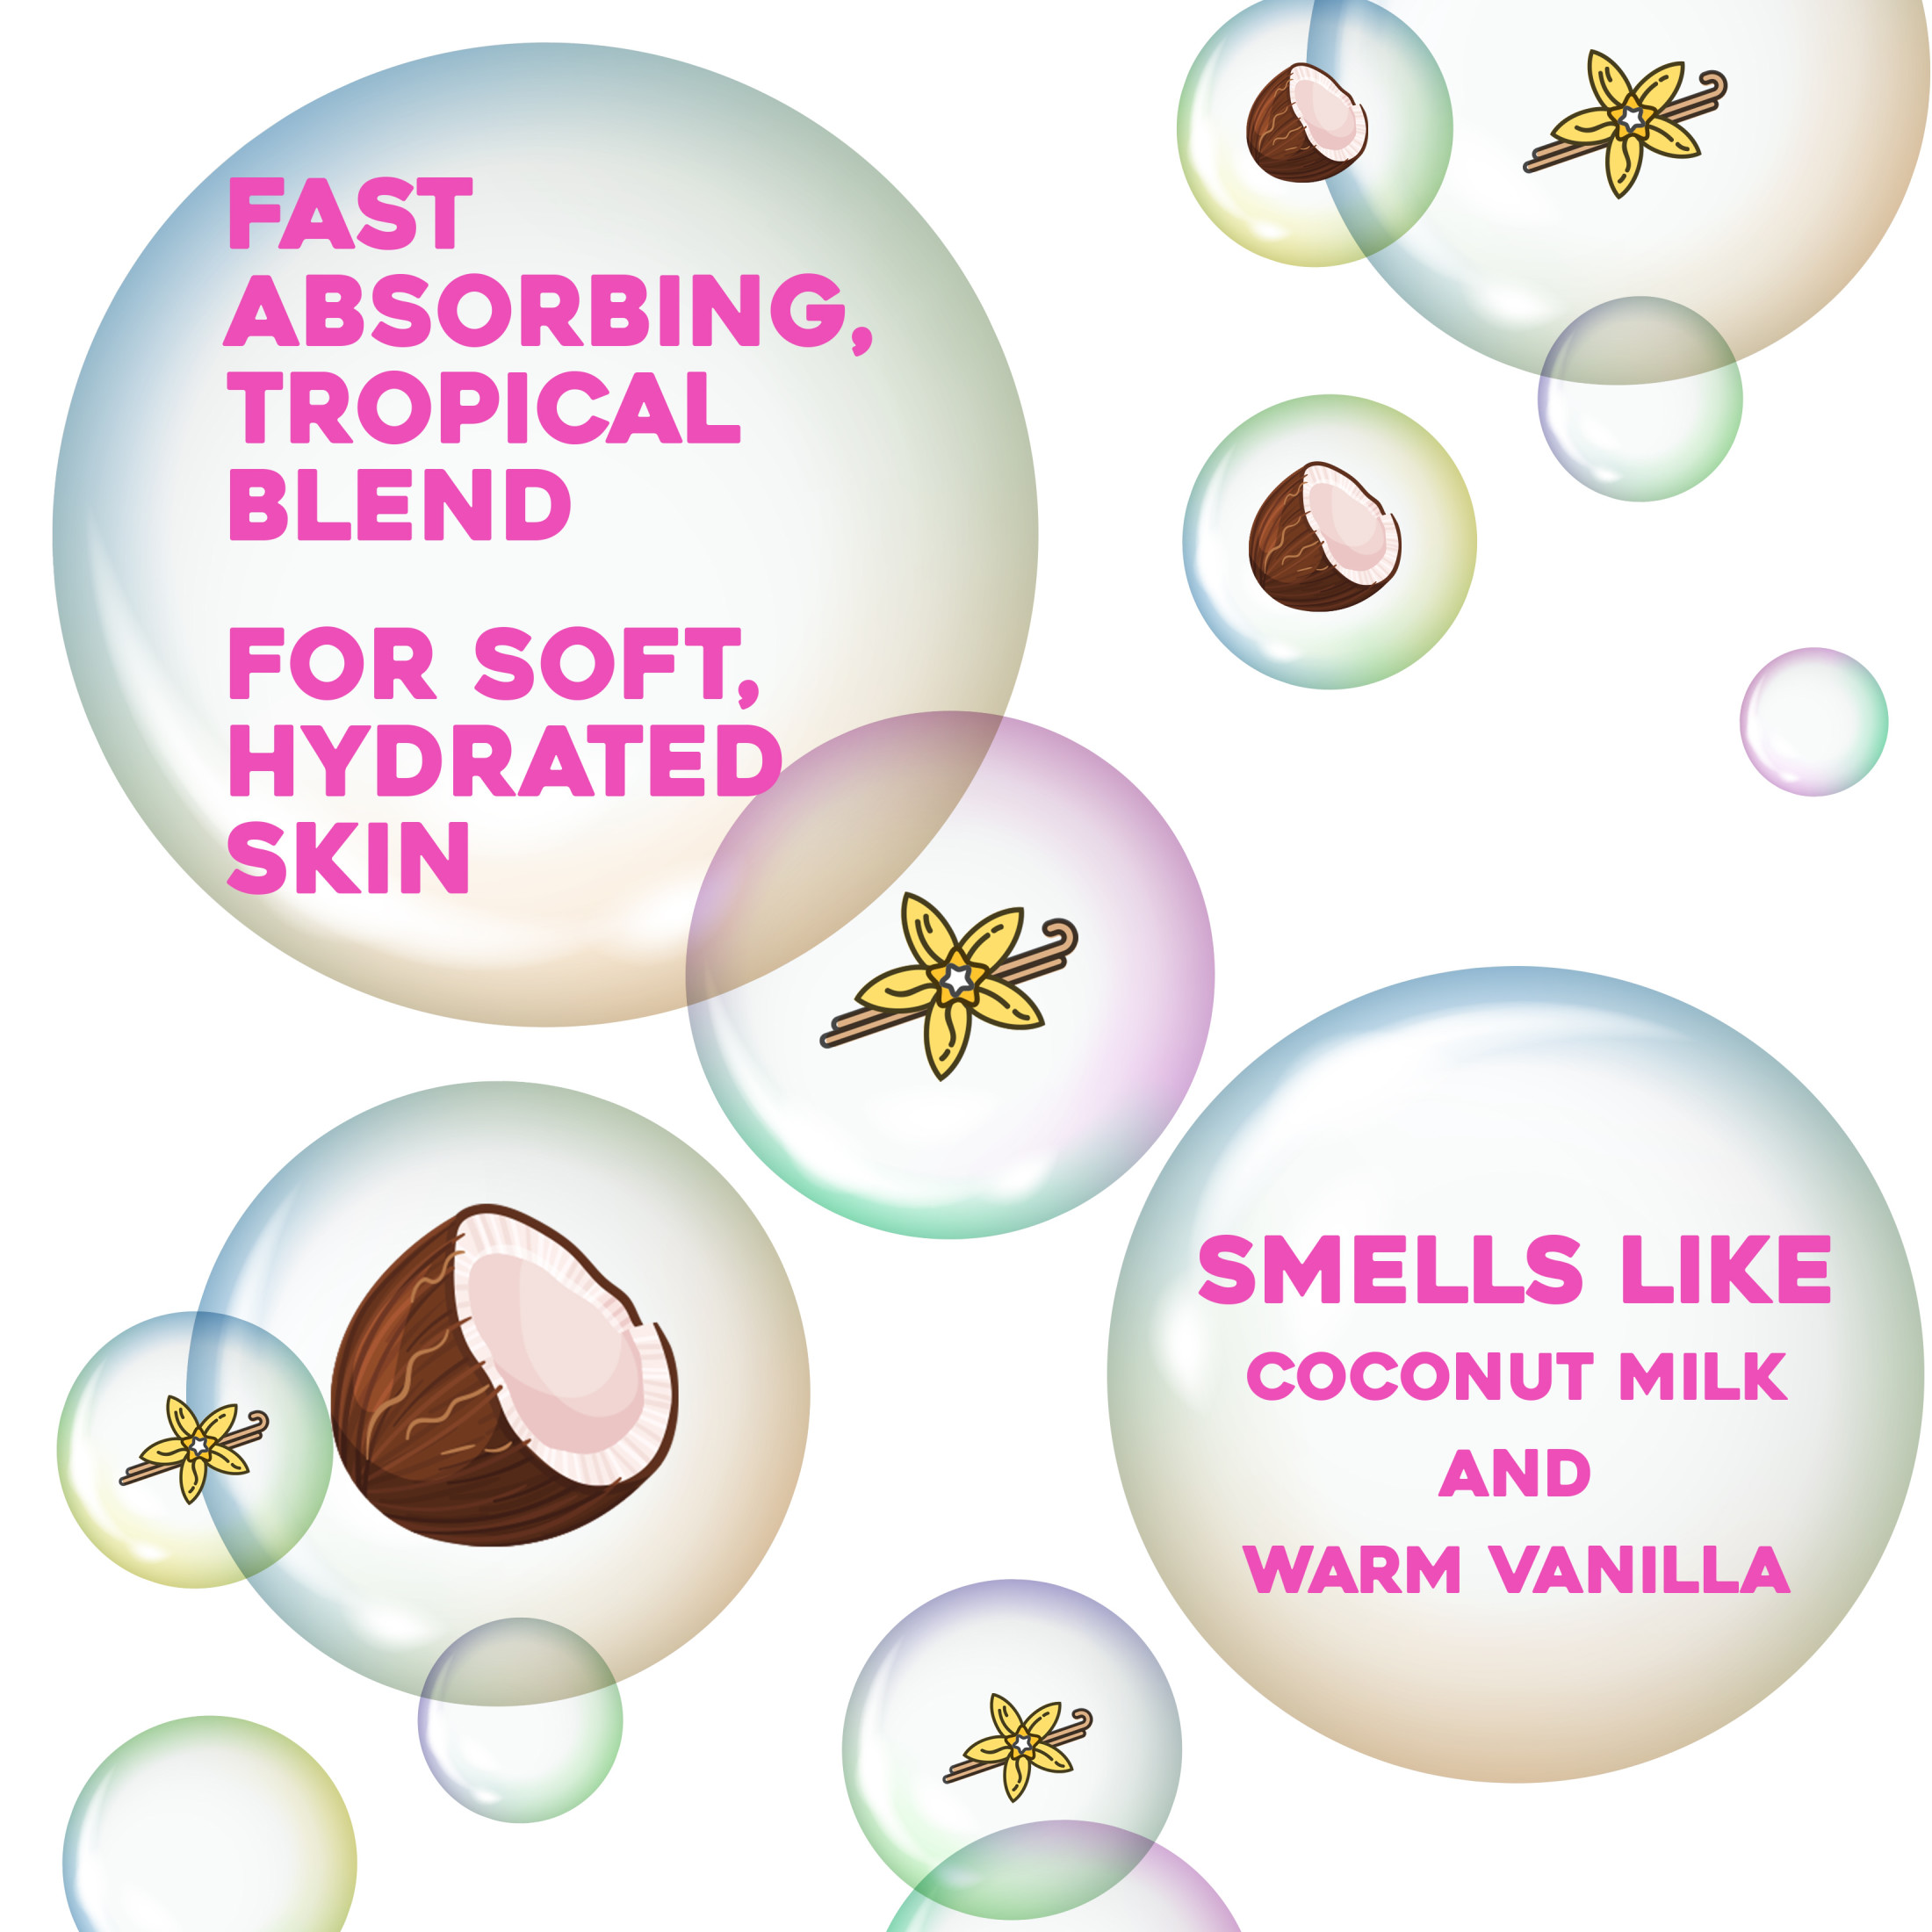 Extra Creamy + Coconut Miracle Oil Body Lotion - image 2 of 4